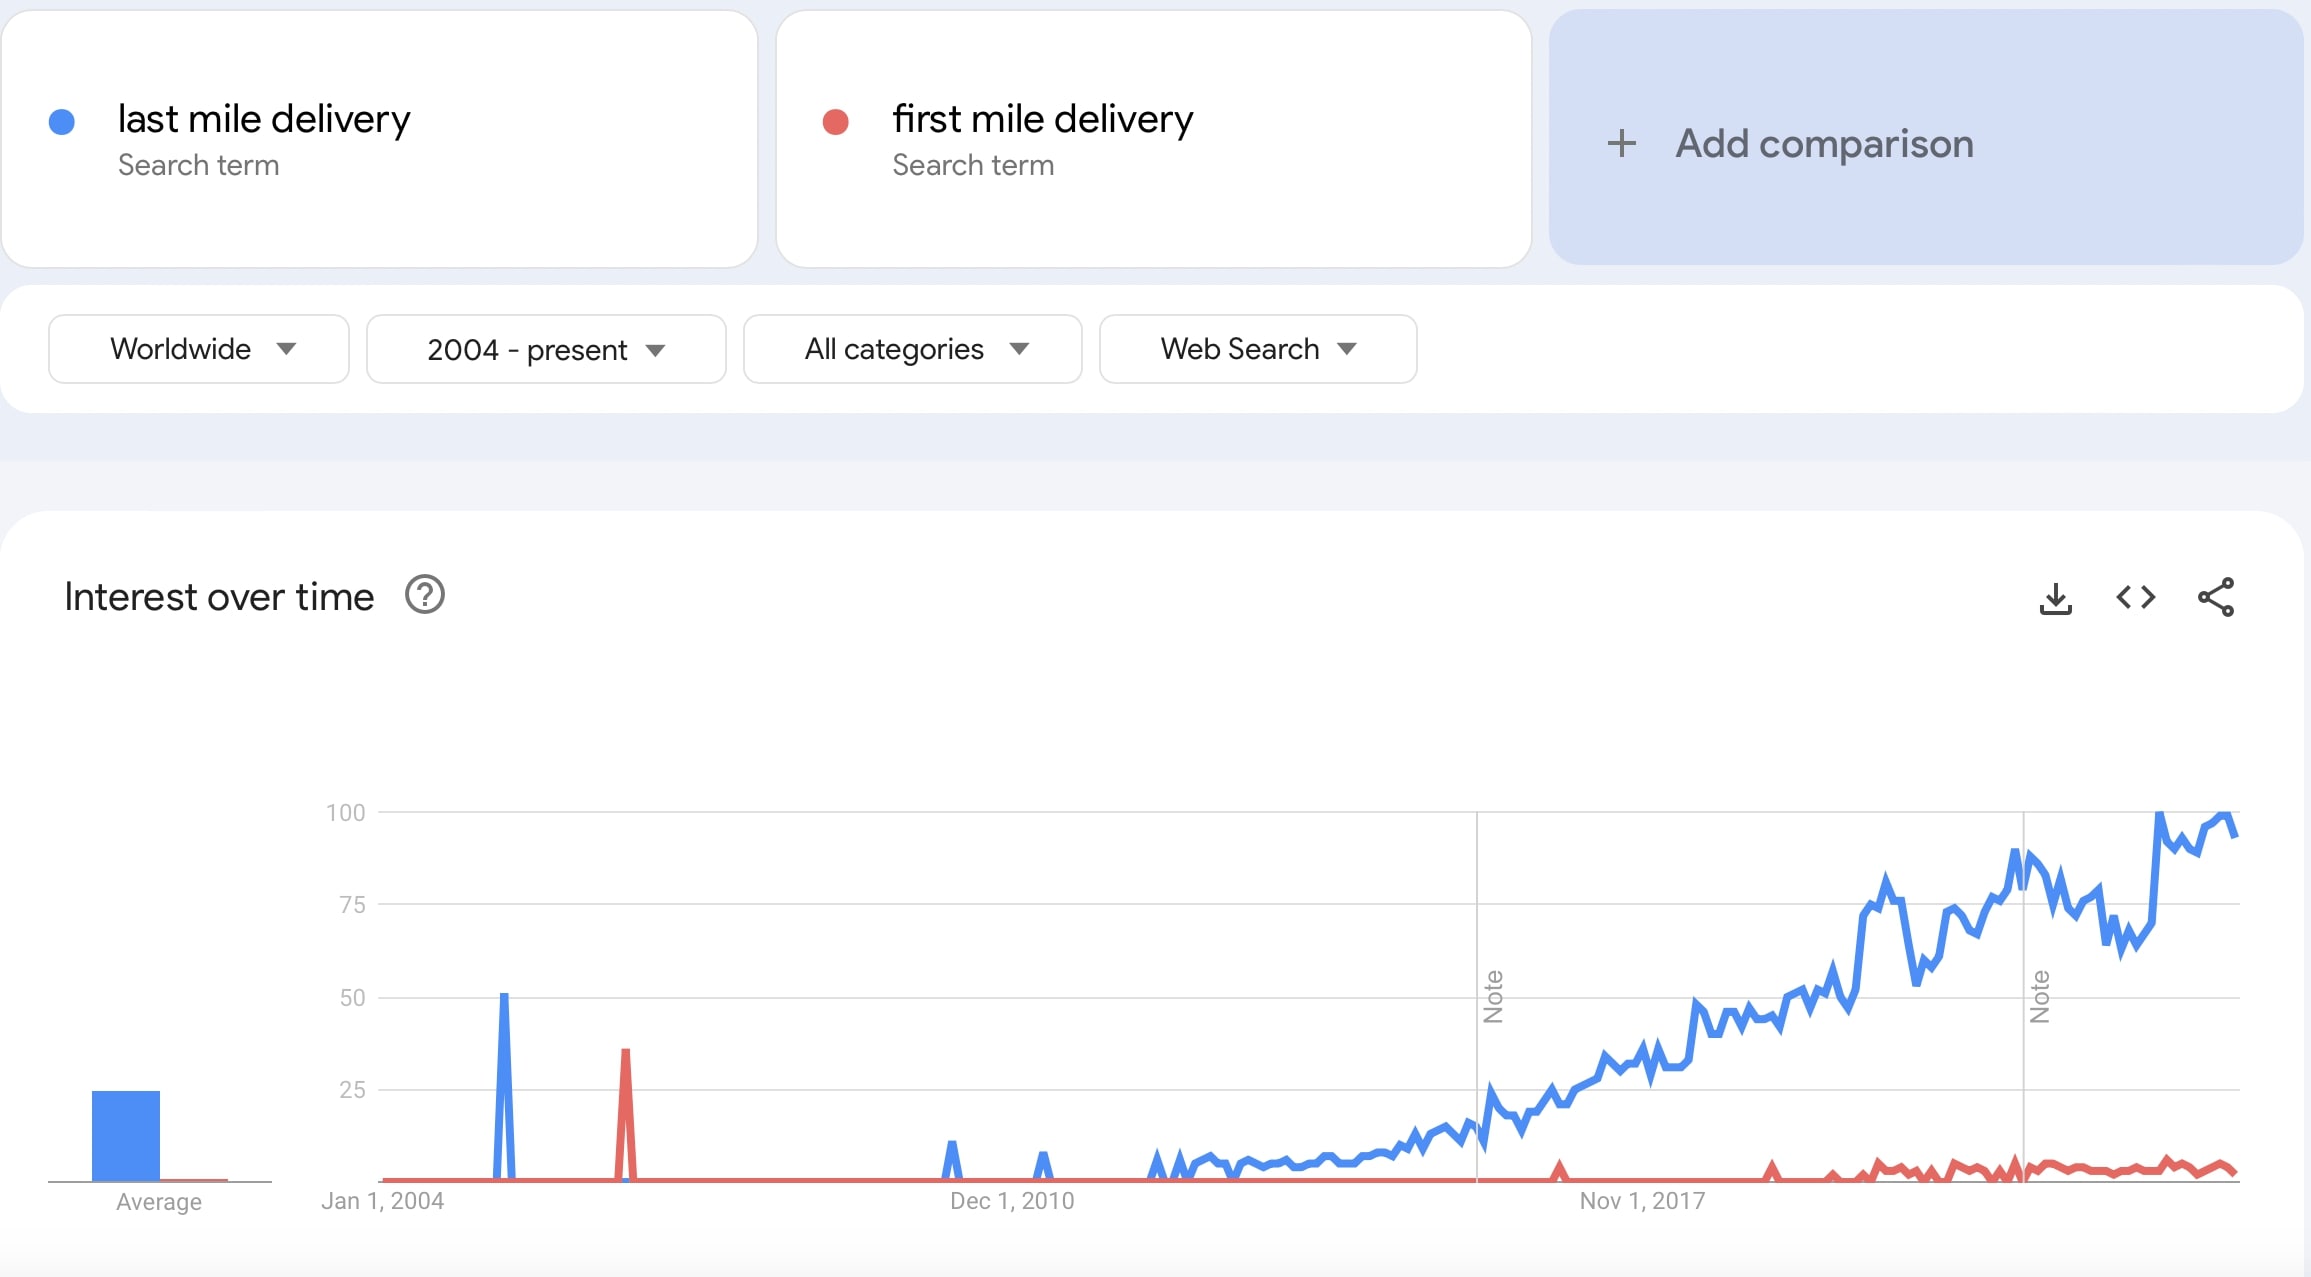 Google Trends report about the search trends of last mile delivery over first mile delivery.